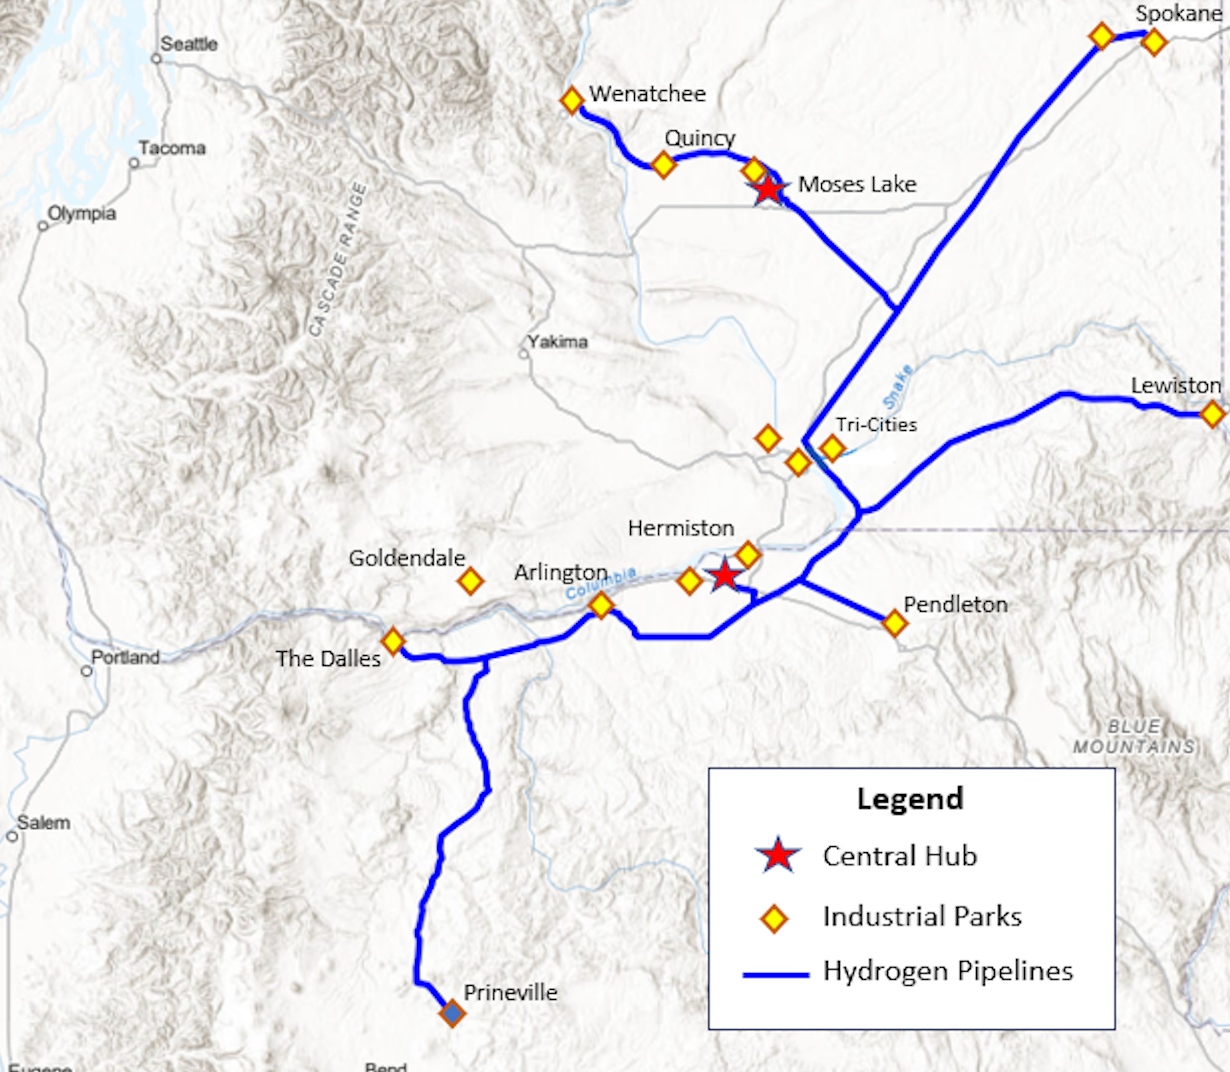 Oregon company pitches plan to create Northwest hydrogen hub outside state agencies